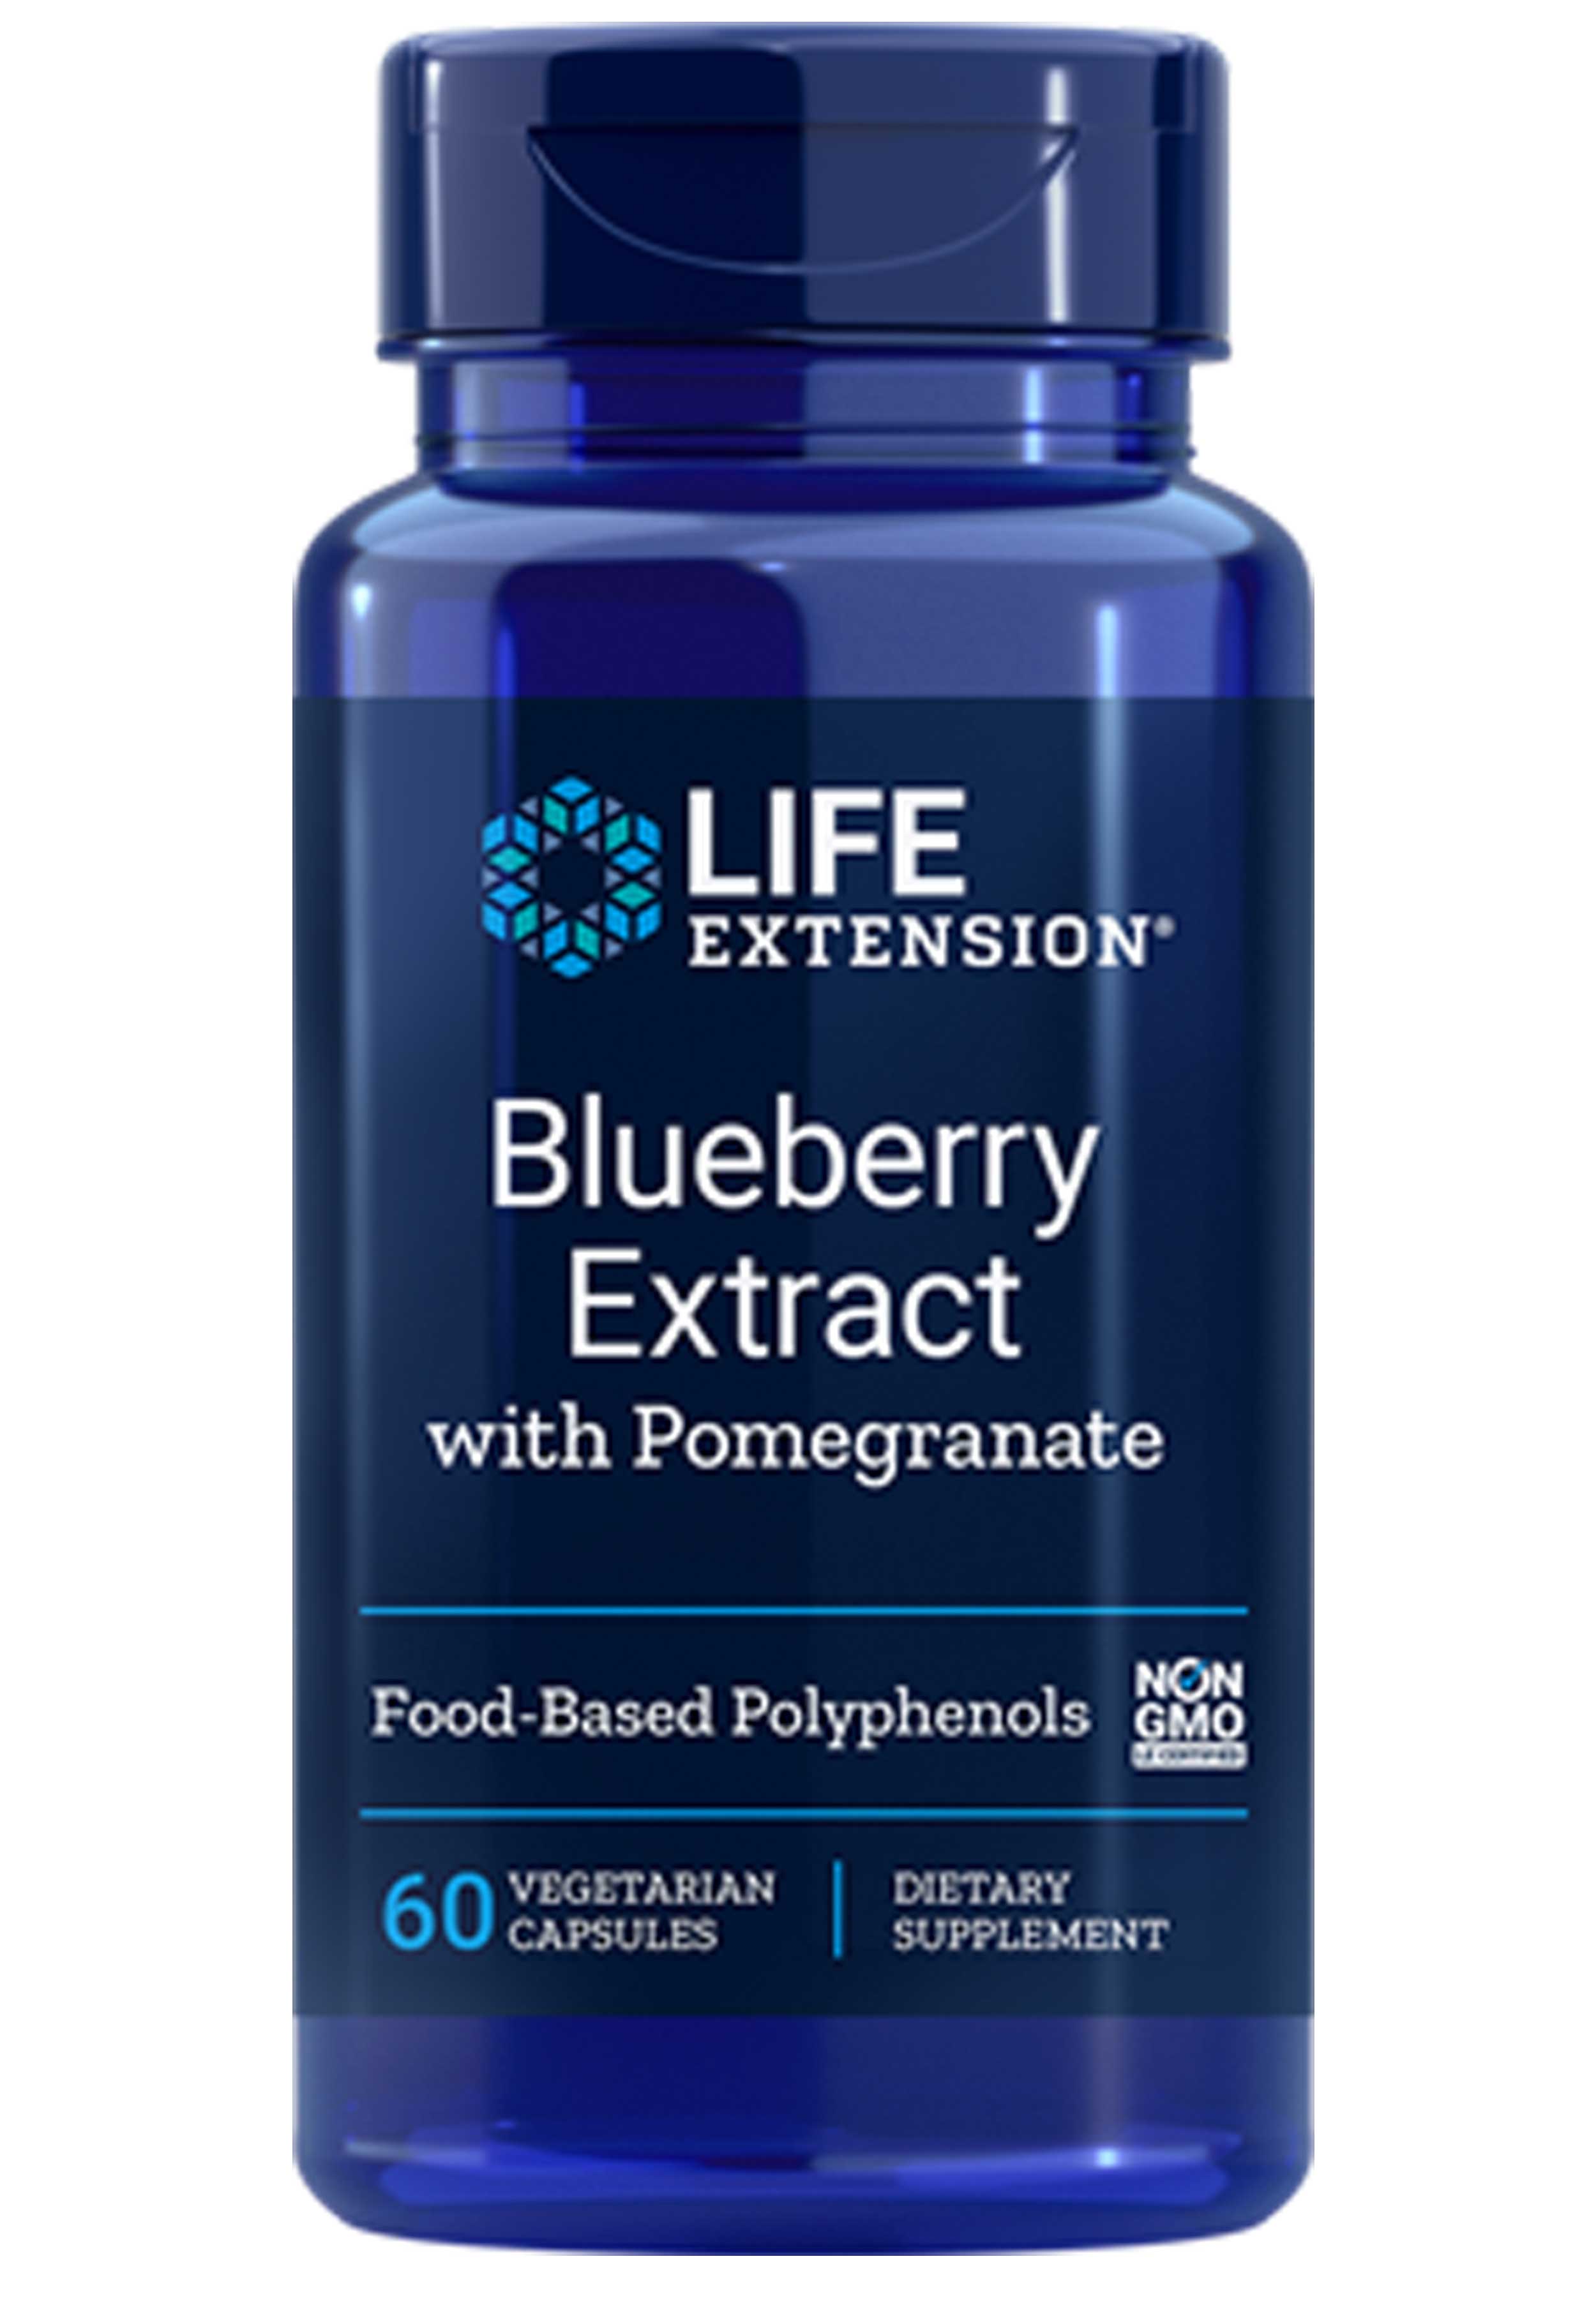 Life Extension Blueberry Extract with Pomegranate